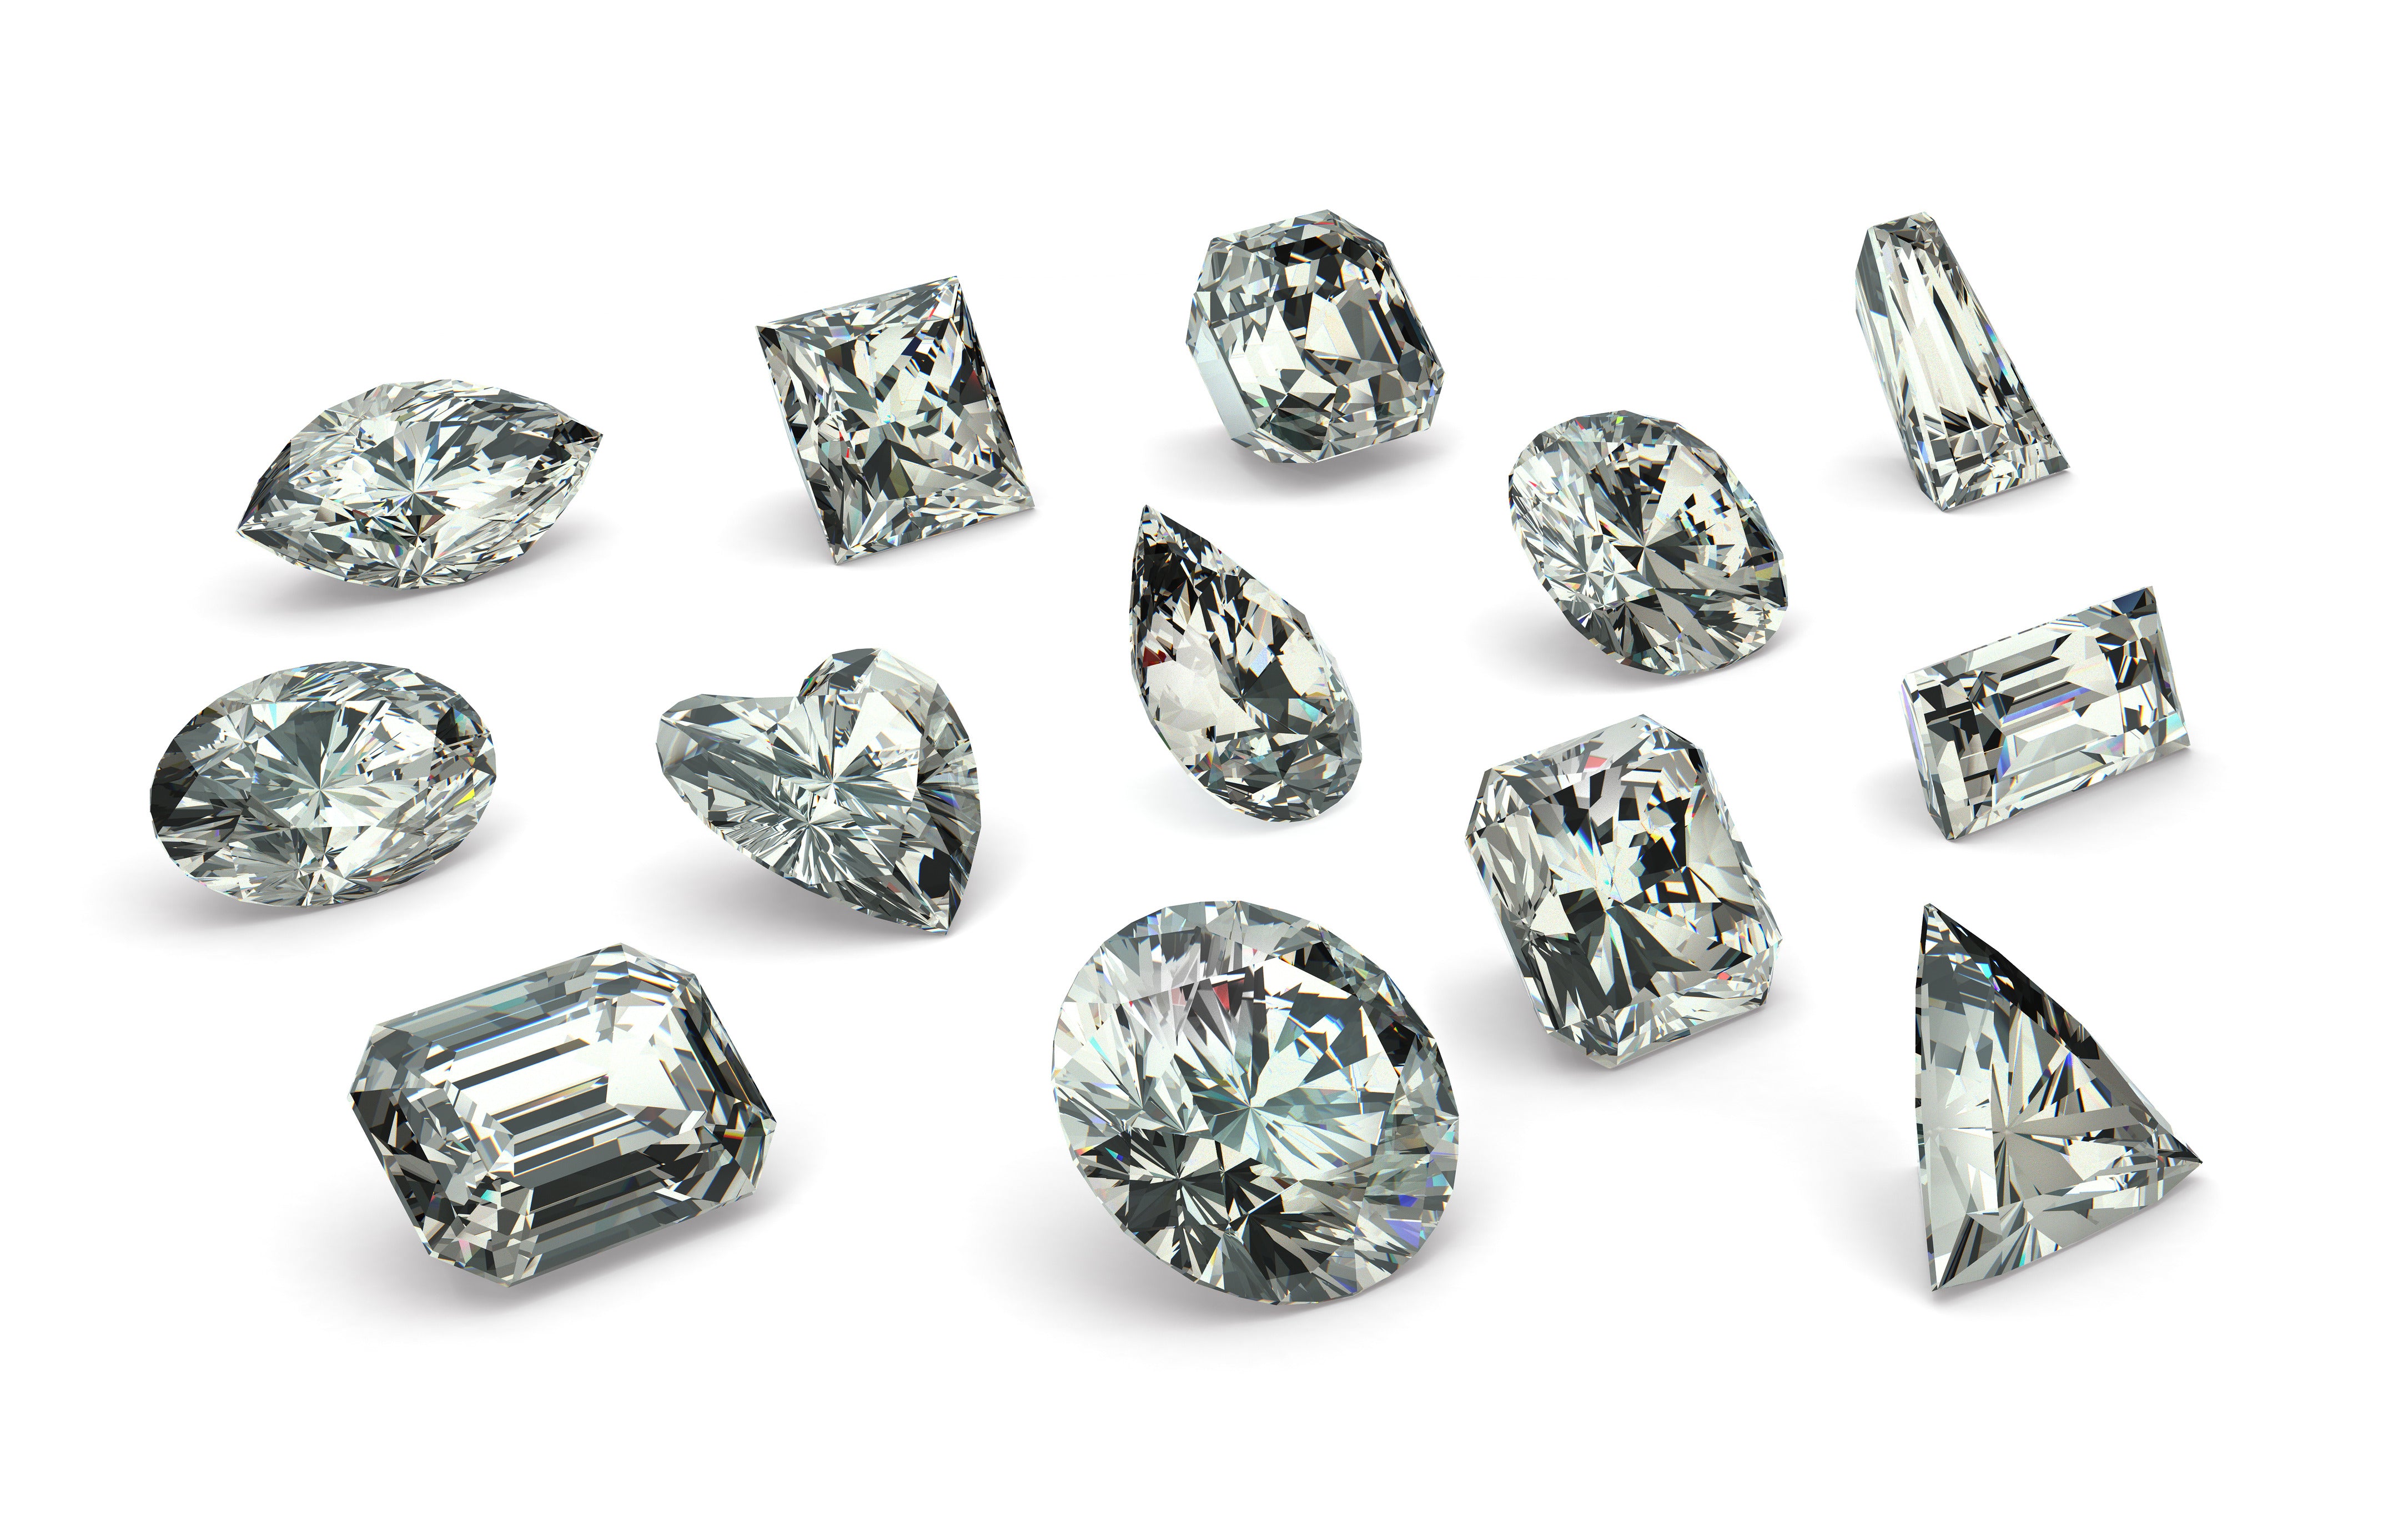 [$29.00] Sample Pack 5A Quality Loose CZ Stones